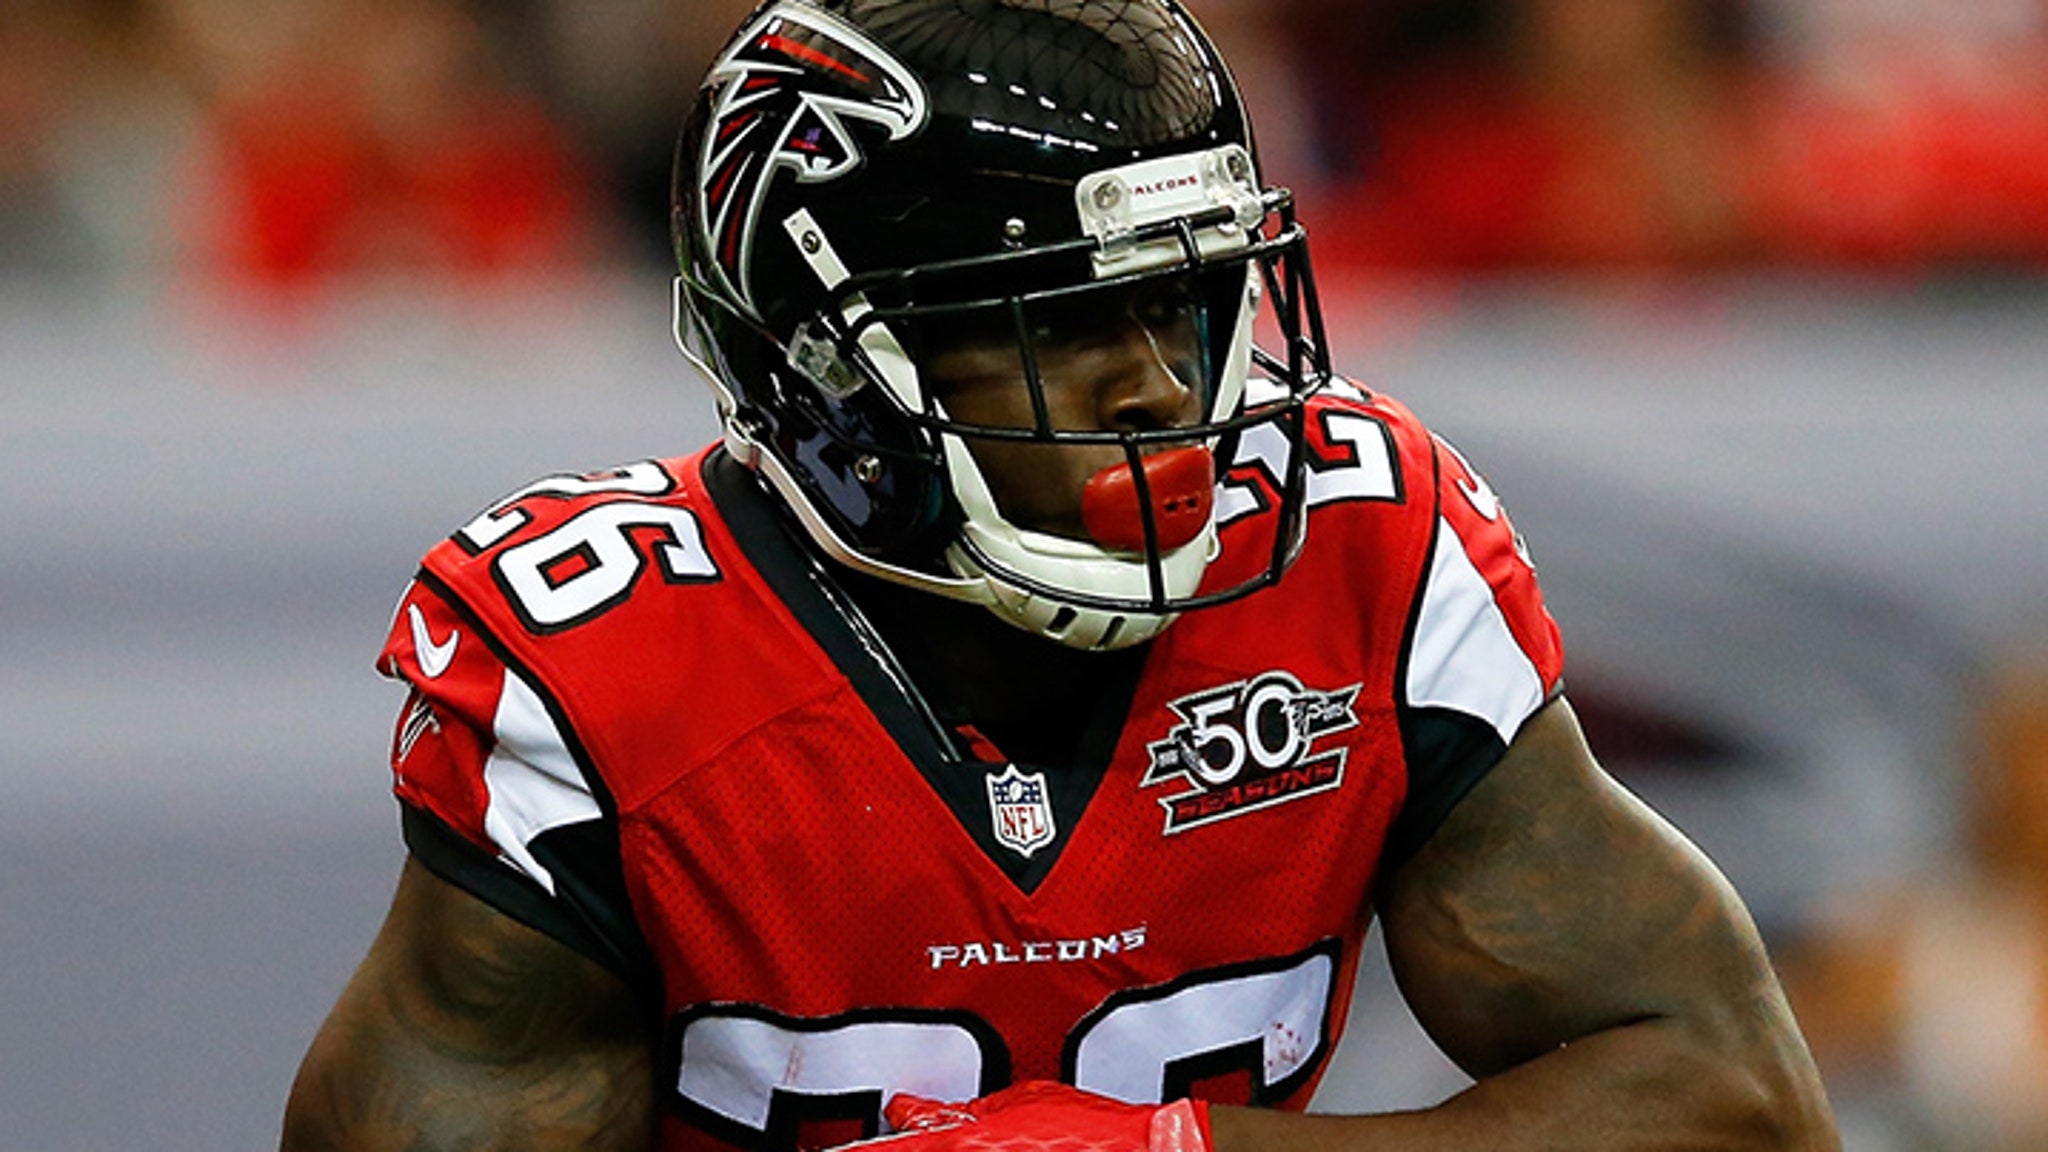 ATL Falcons RB -- Injured In the Shower ... Possible Concussion